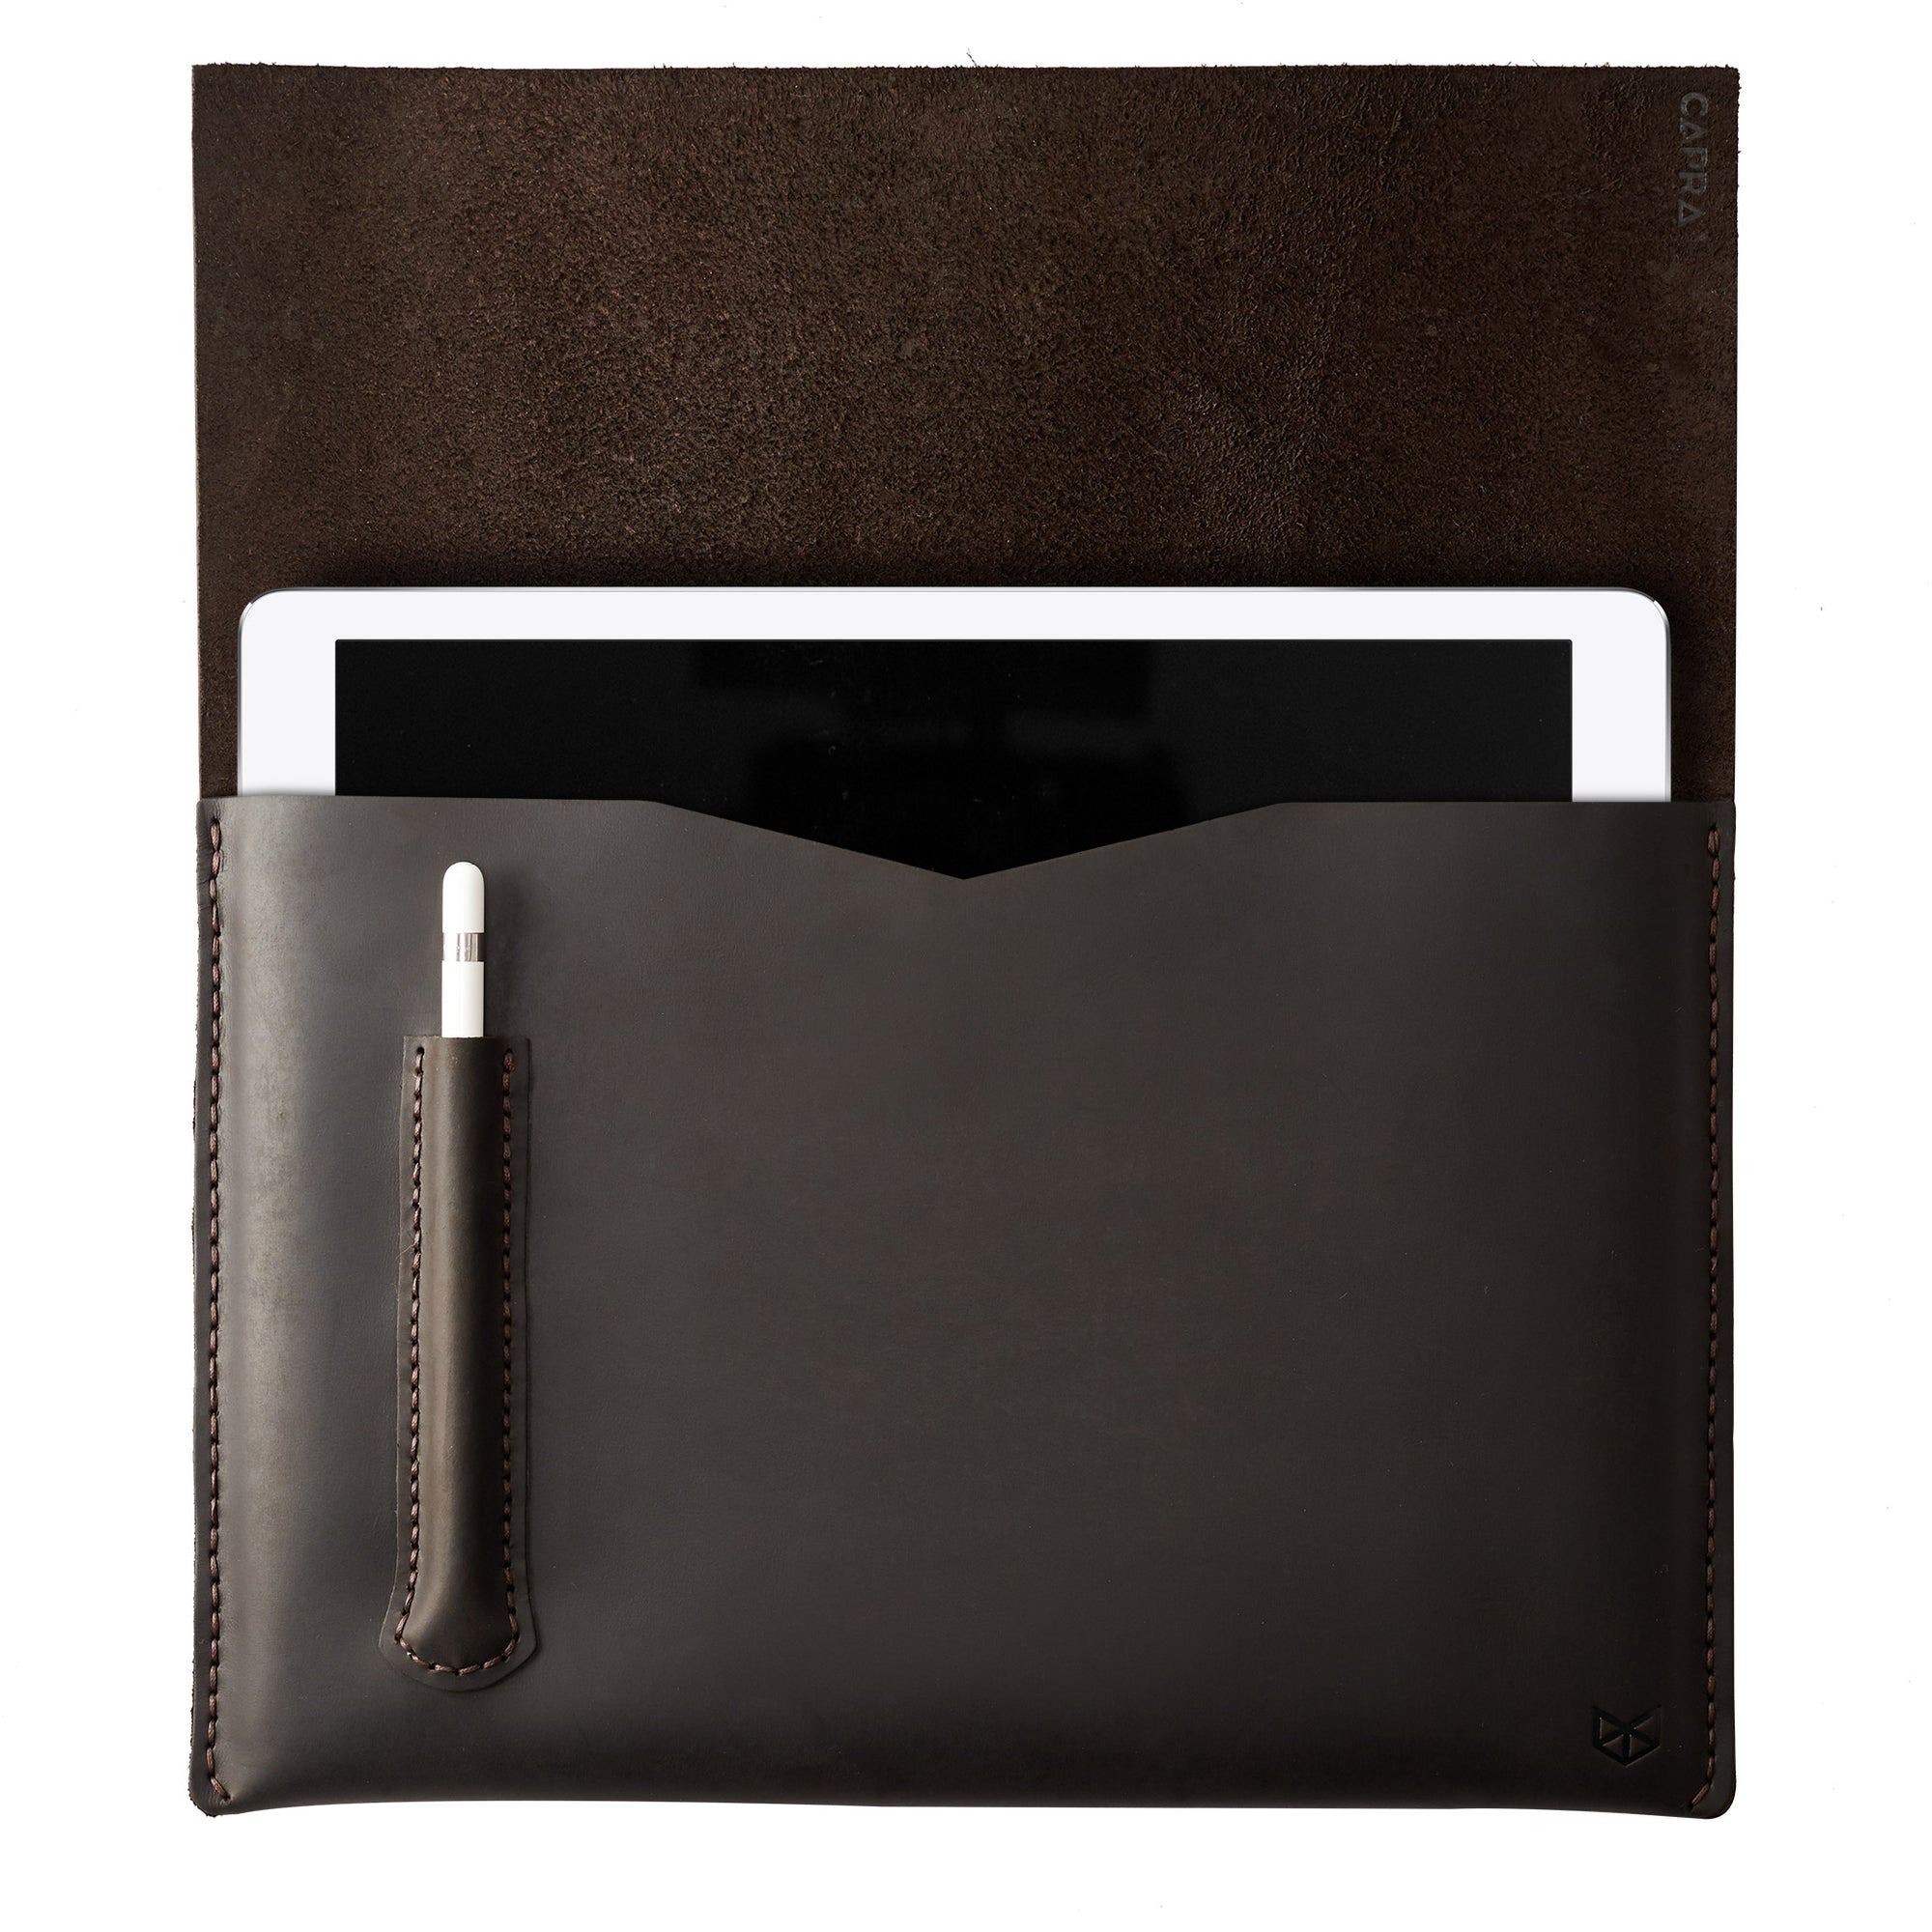 Style hold by model. Marron draftsman 2 case by Capra Leather. Microsoft Surface sleeve.